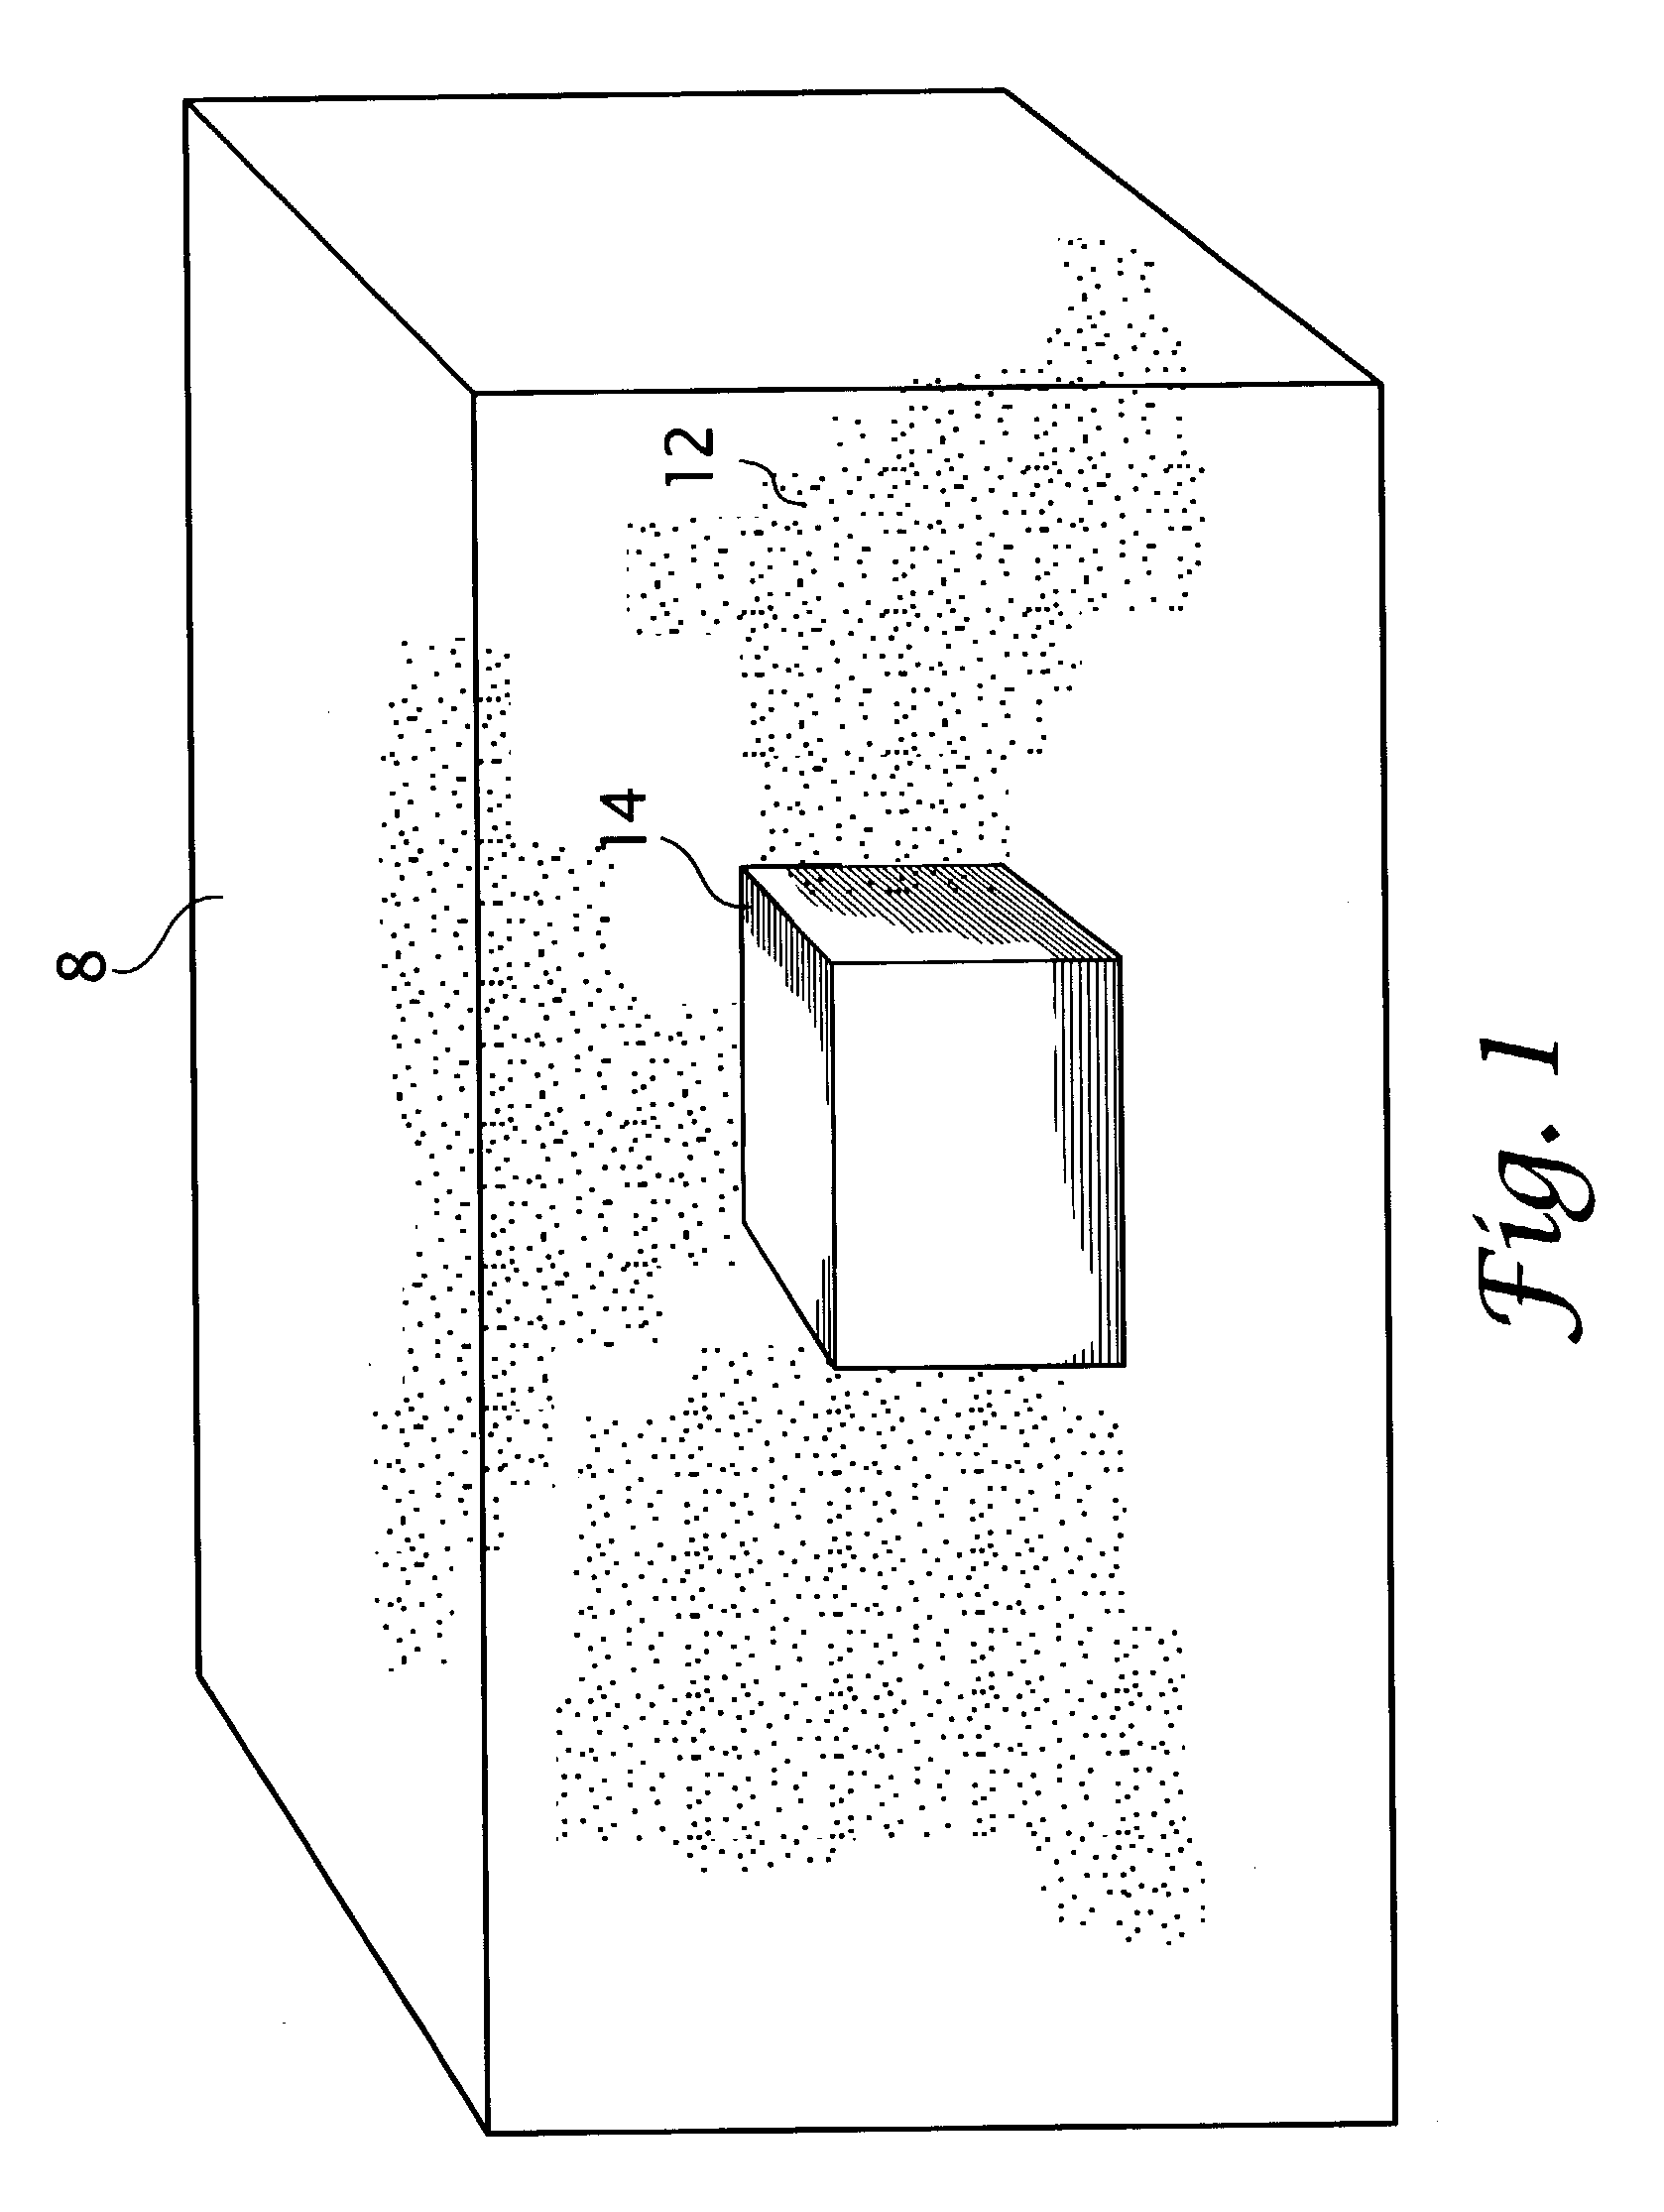 Apparatus and method for fine mist sterilization or sanitation using a biocide